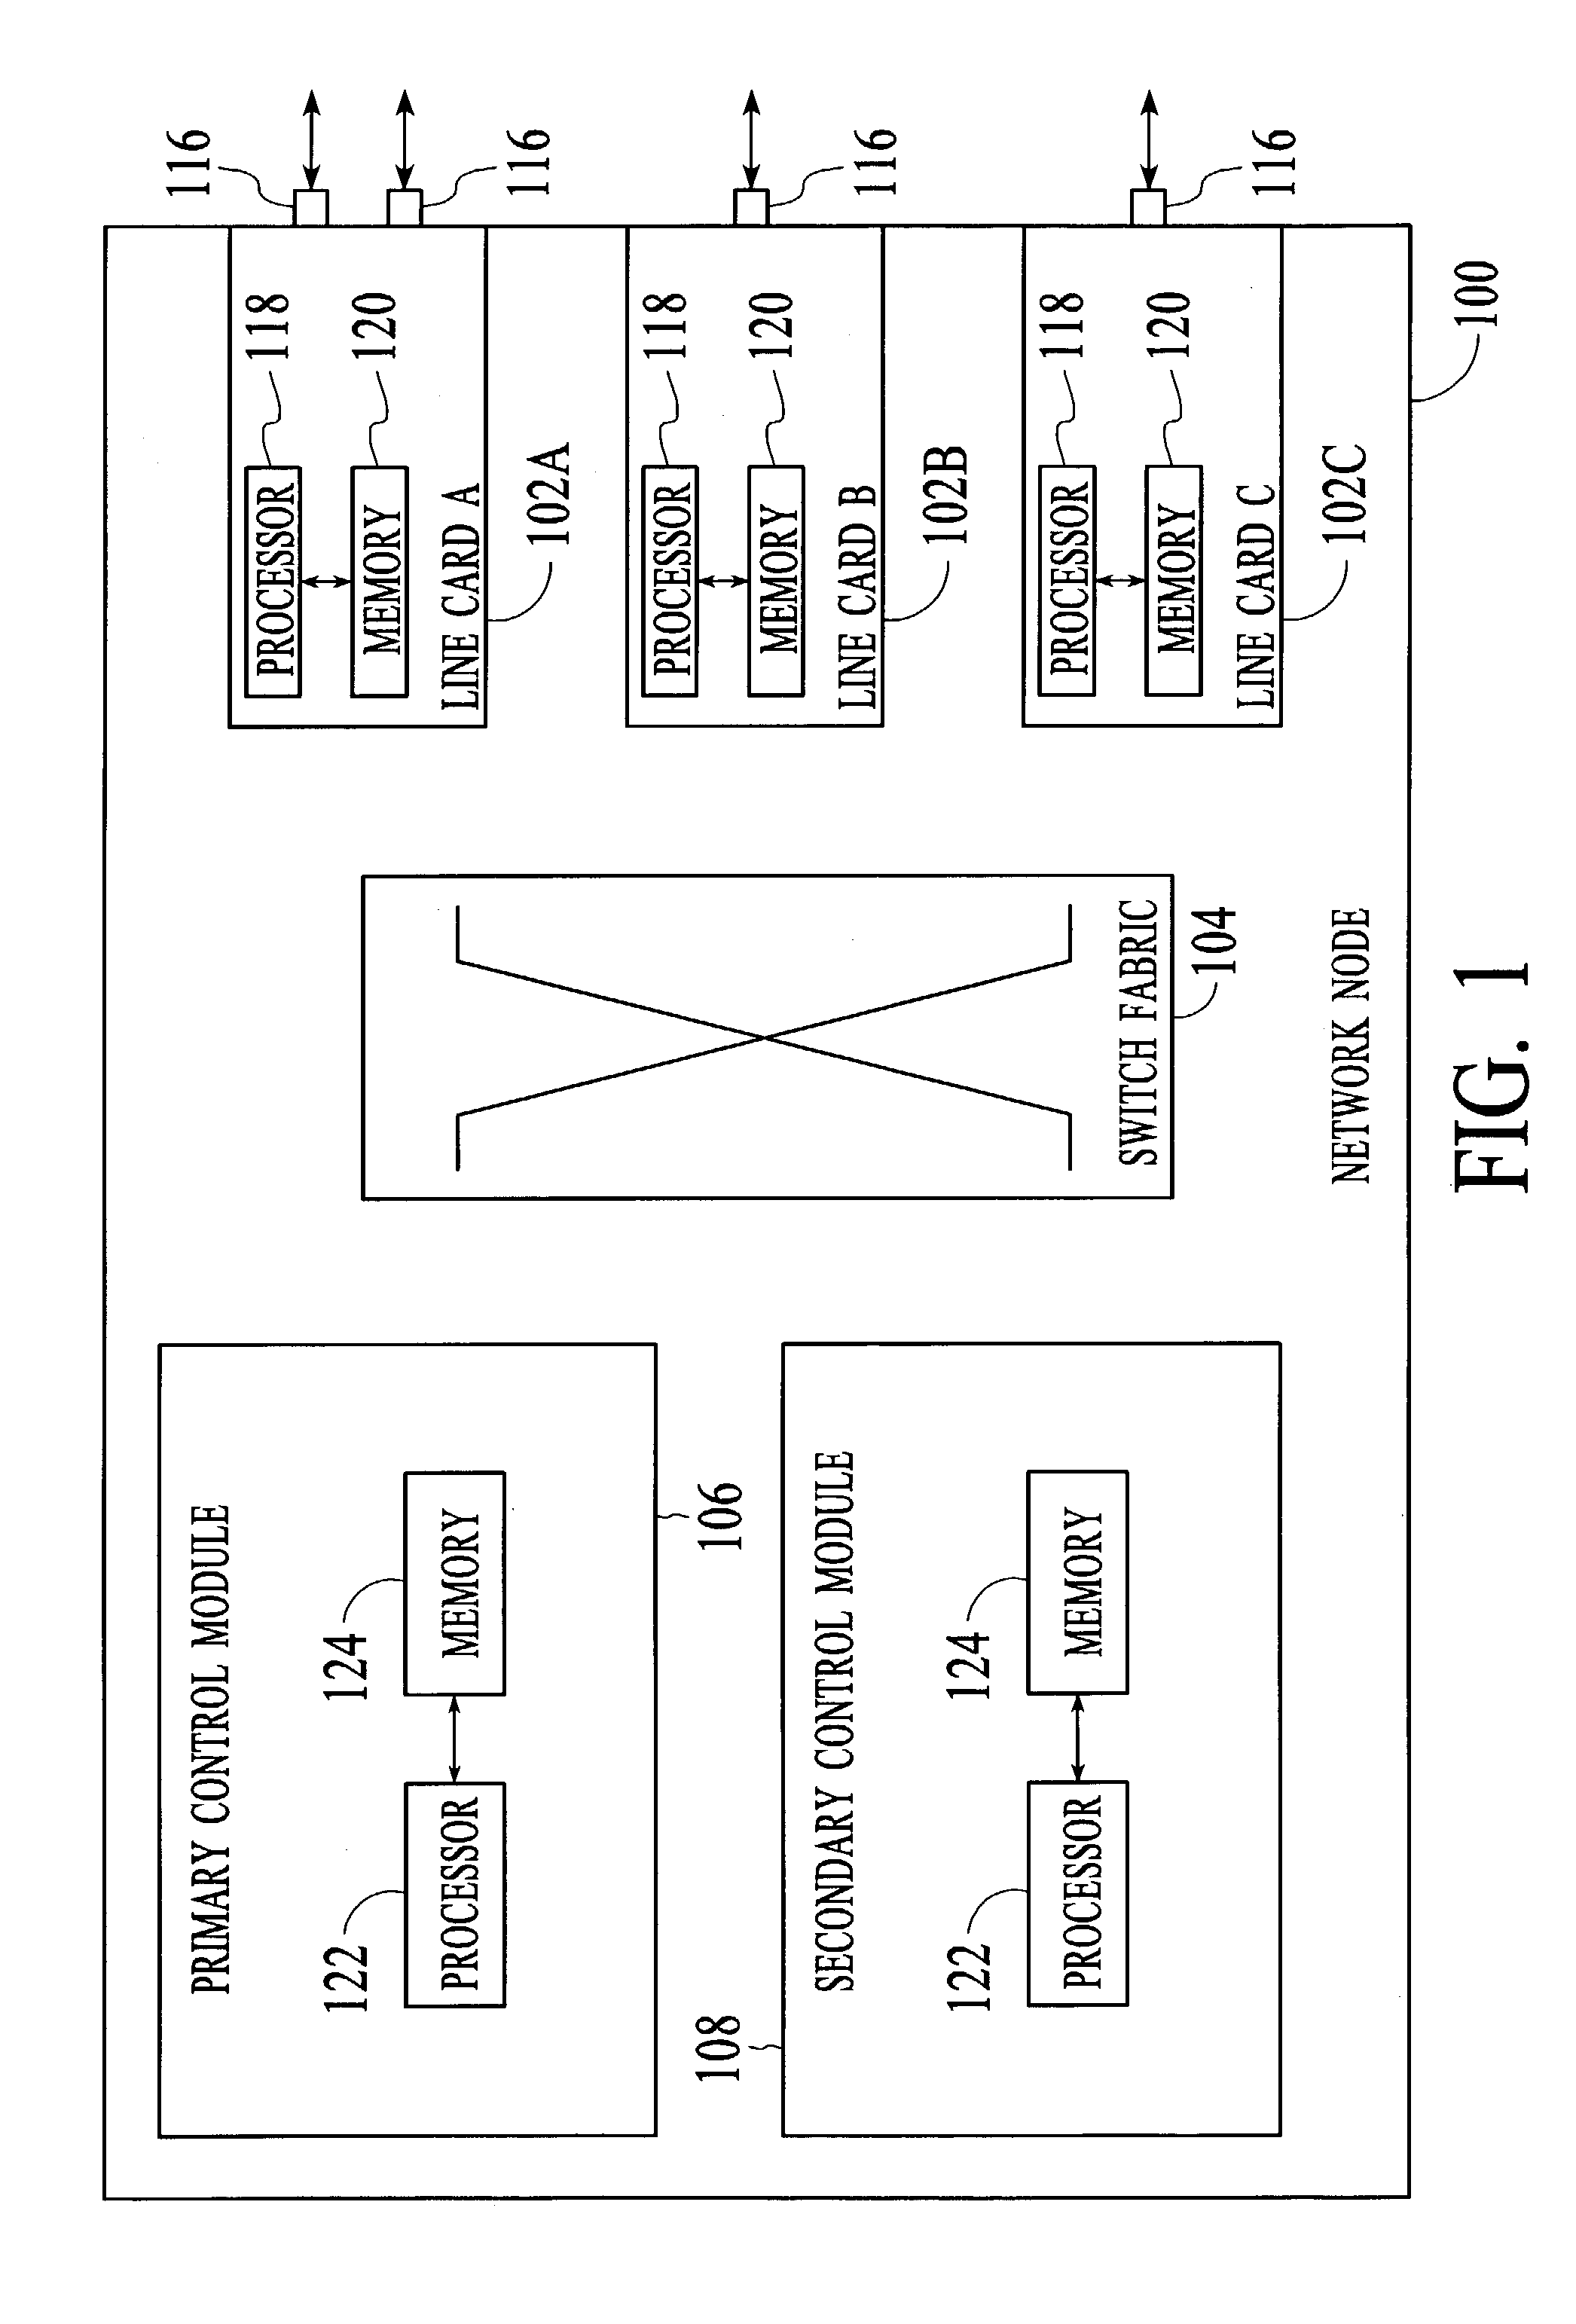 Distribution of forwarding information in a network node